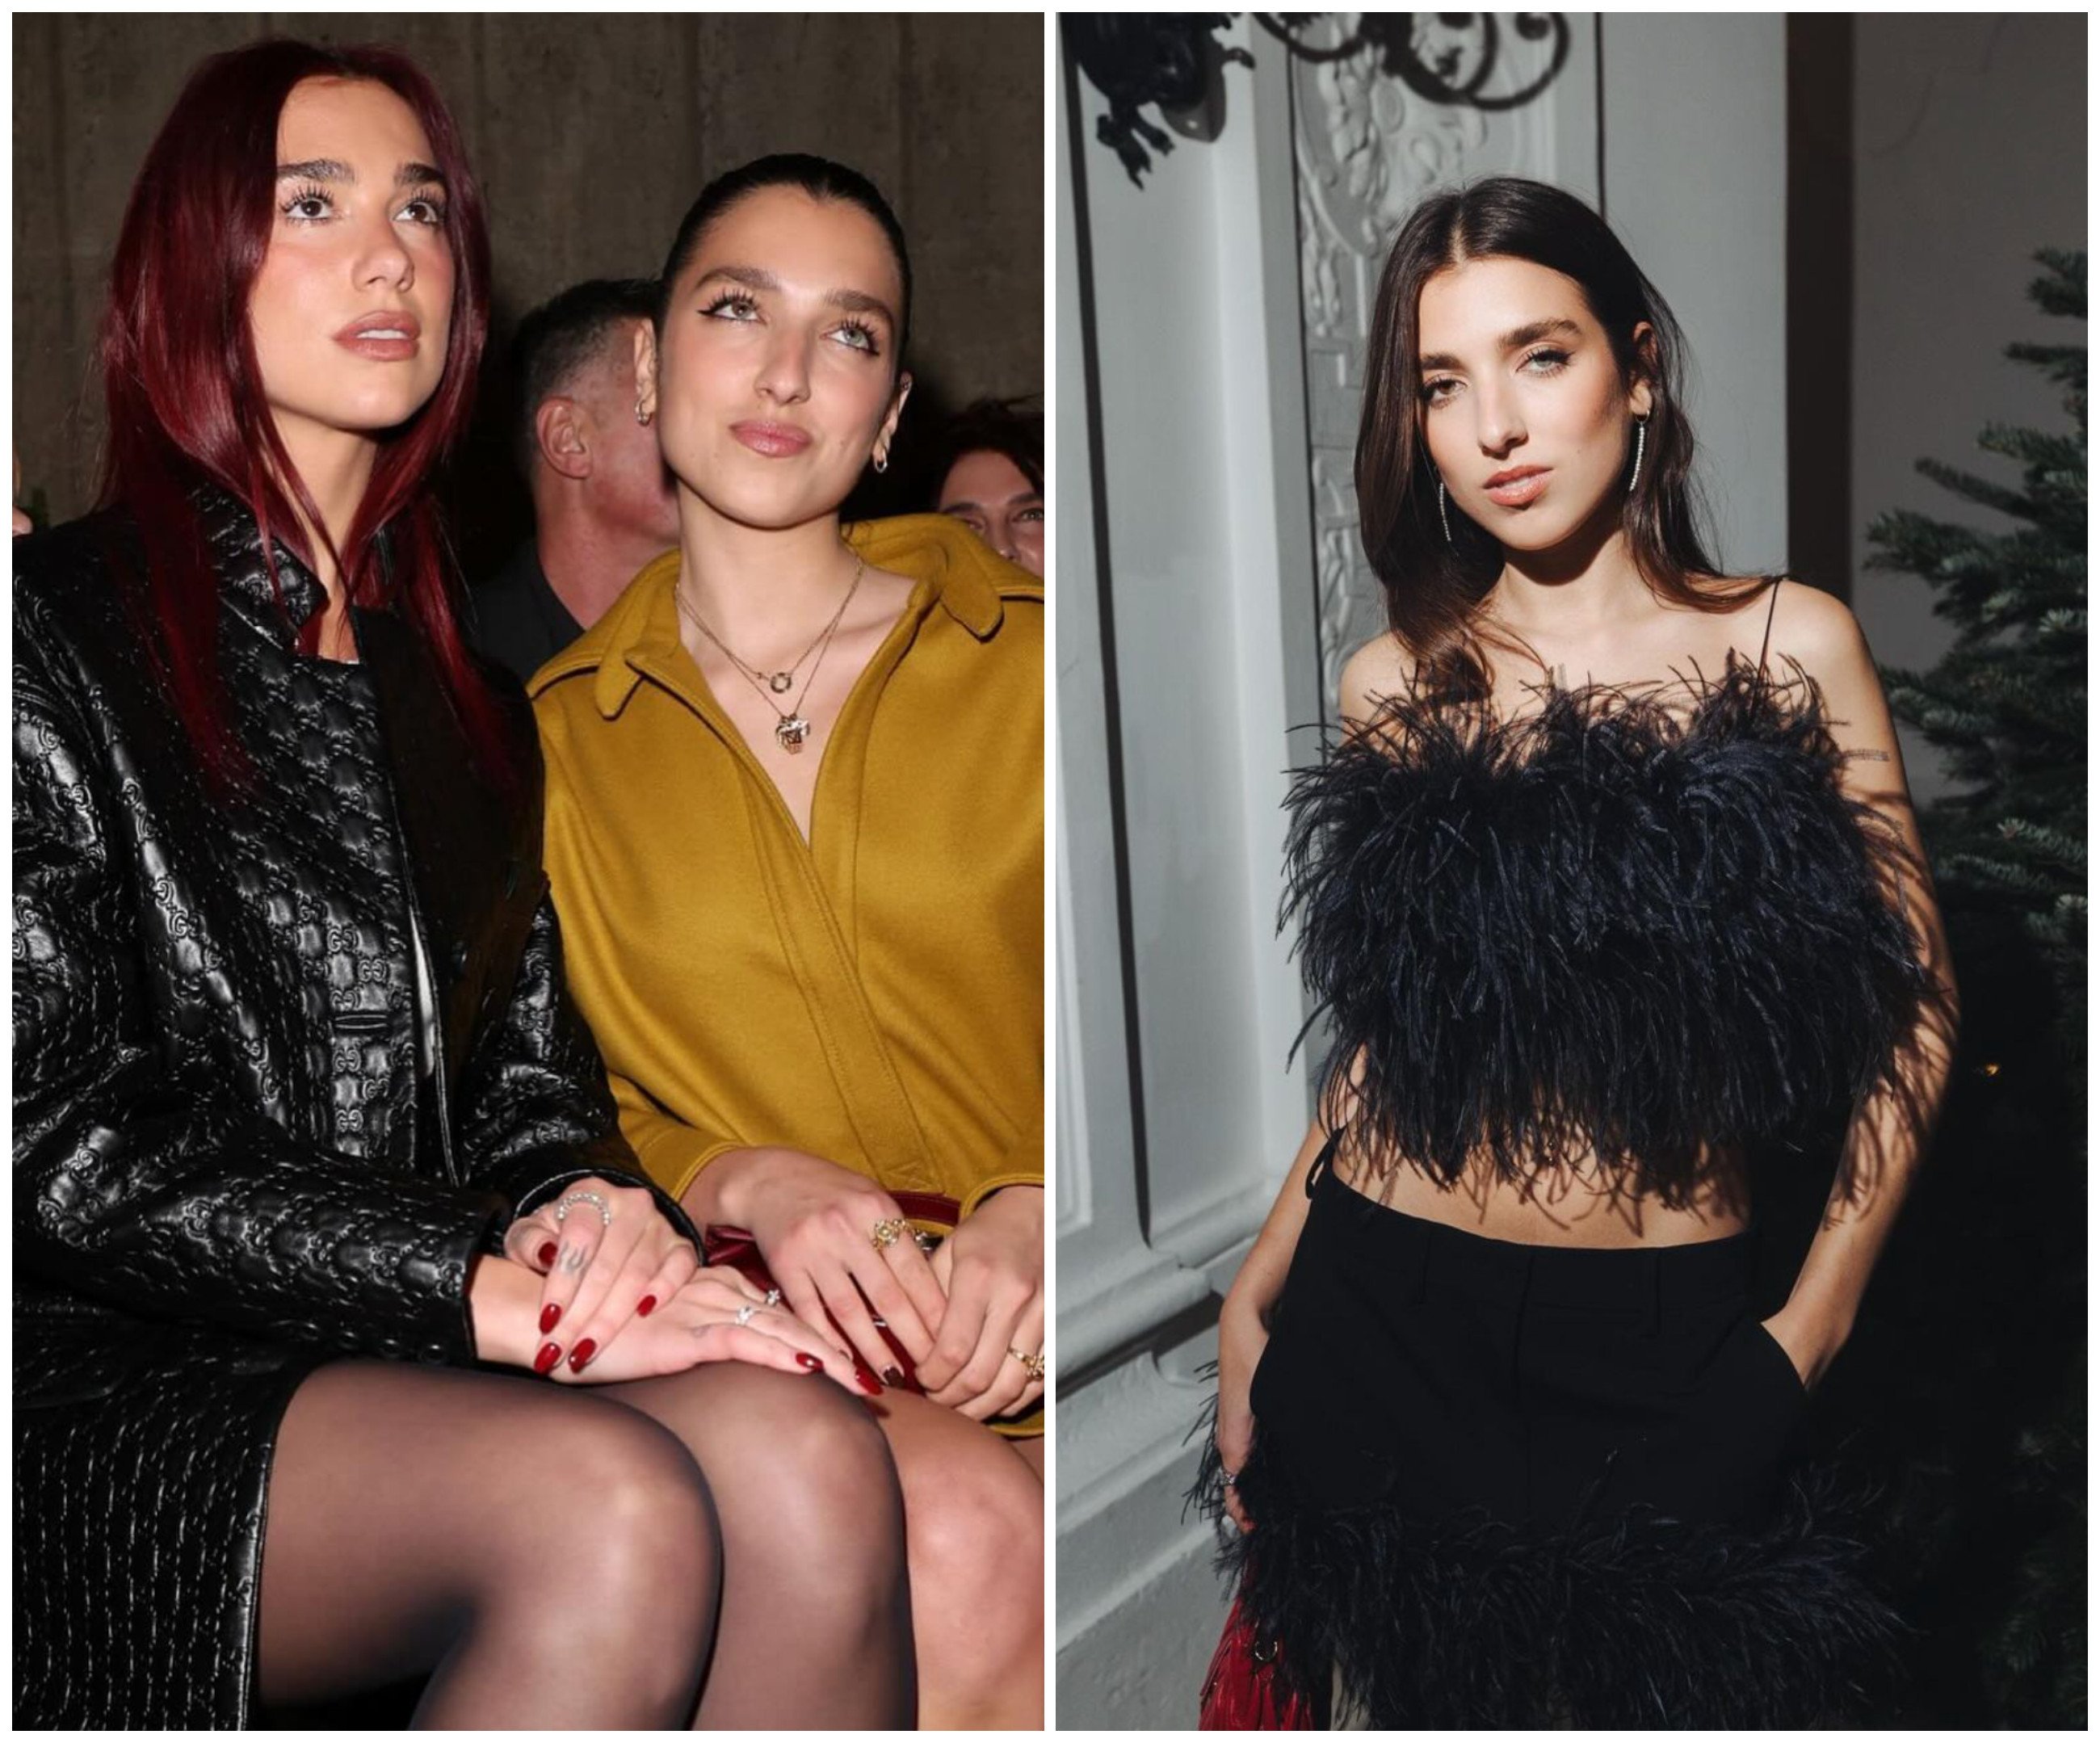 Rina Lipa, pop star Dua Lipa’s little sister, is beginning to make a name for herself in the fashion and film worlds. Photos: @dualipa; @rinalipa/Instagram